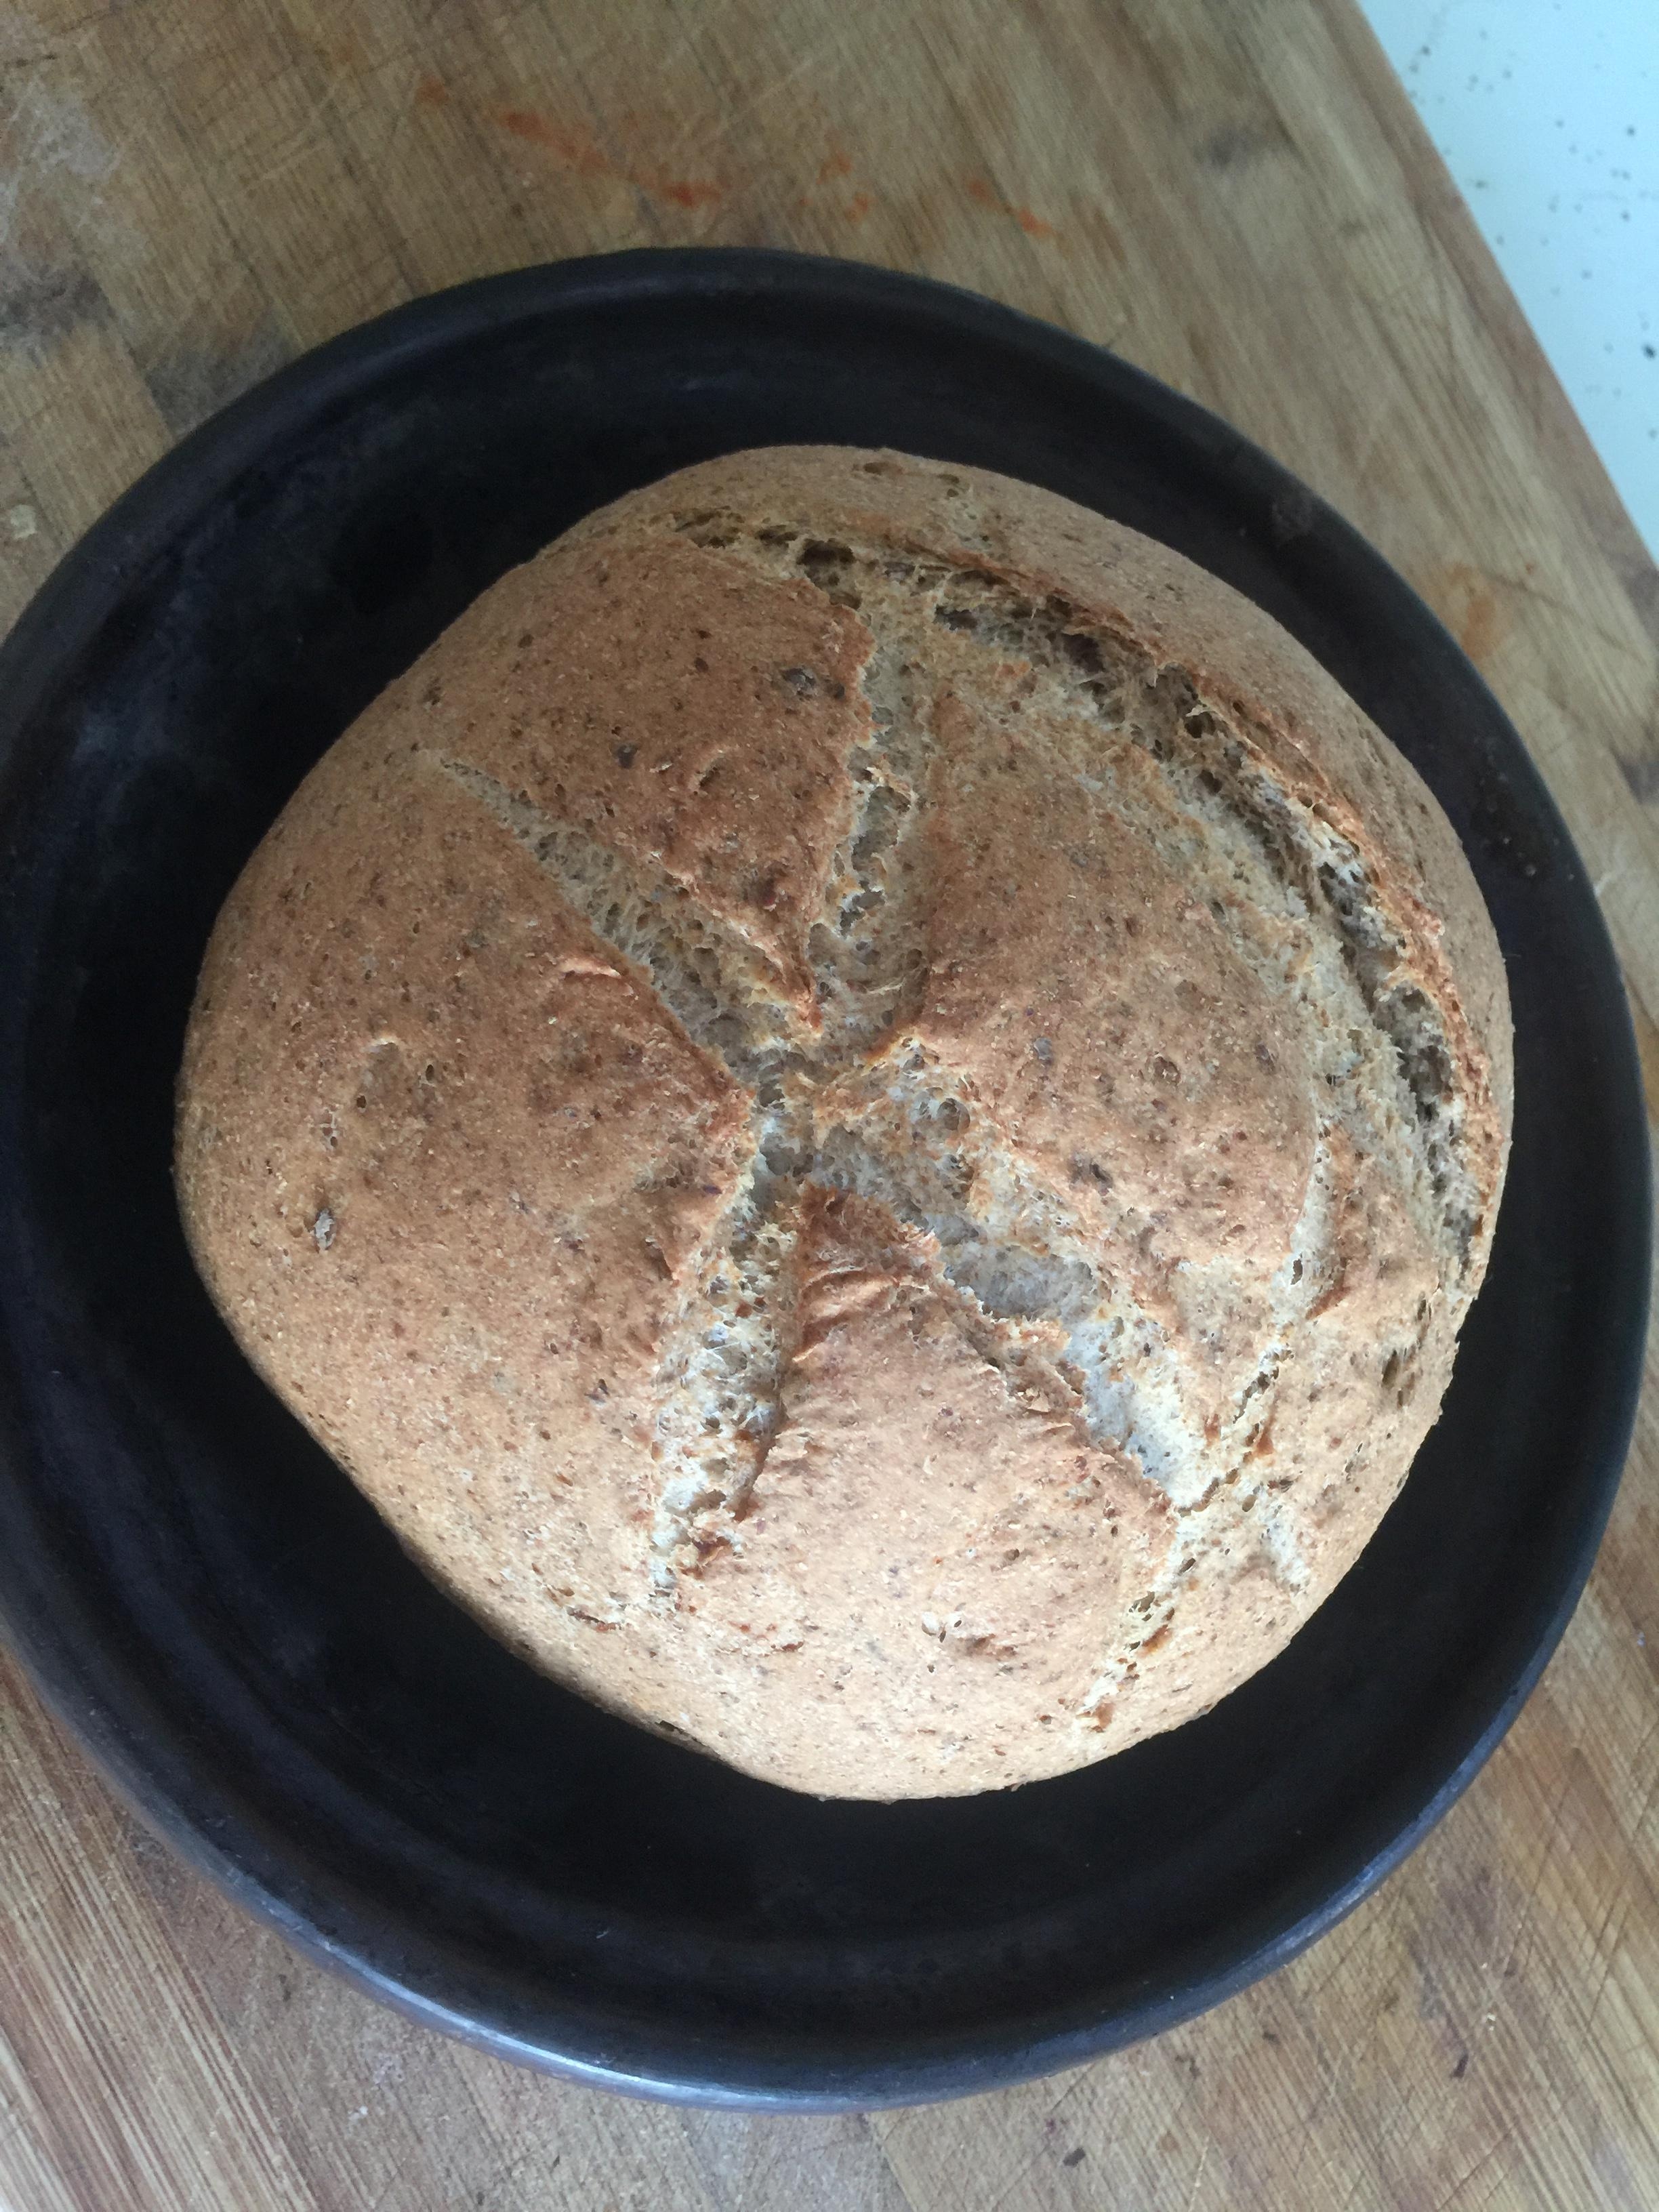 Working from home, and having plenty of time, I took up bread making/baking, this is one of the lockdown's many babies